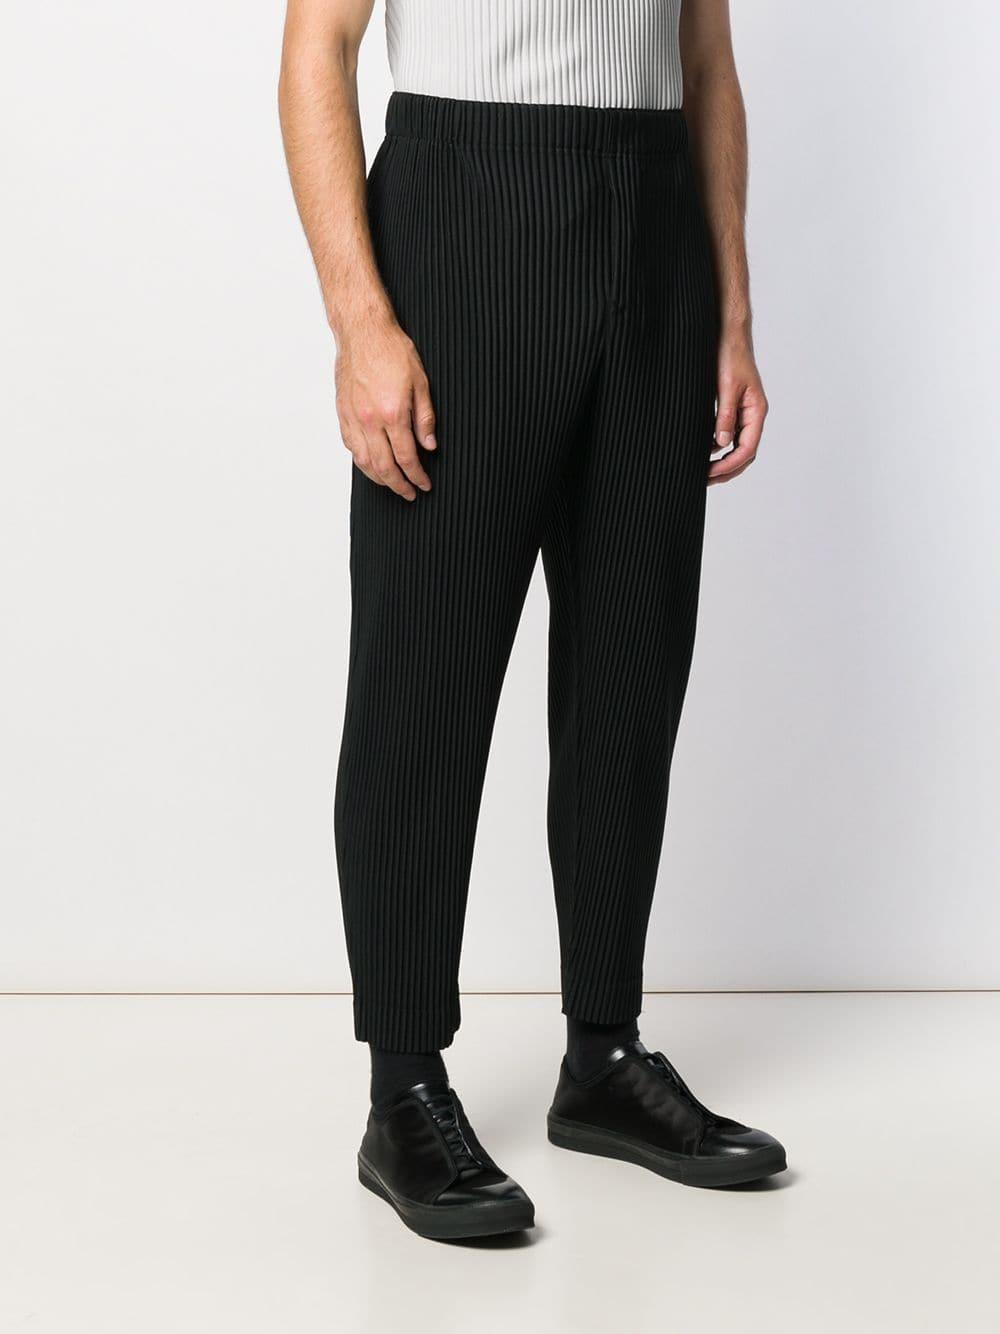 Homme Plissé Issey Miyake Pleated Trousers in Black for Men - Lyst